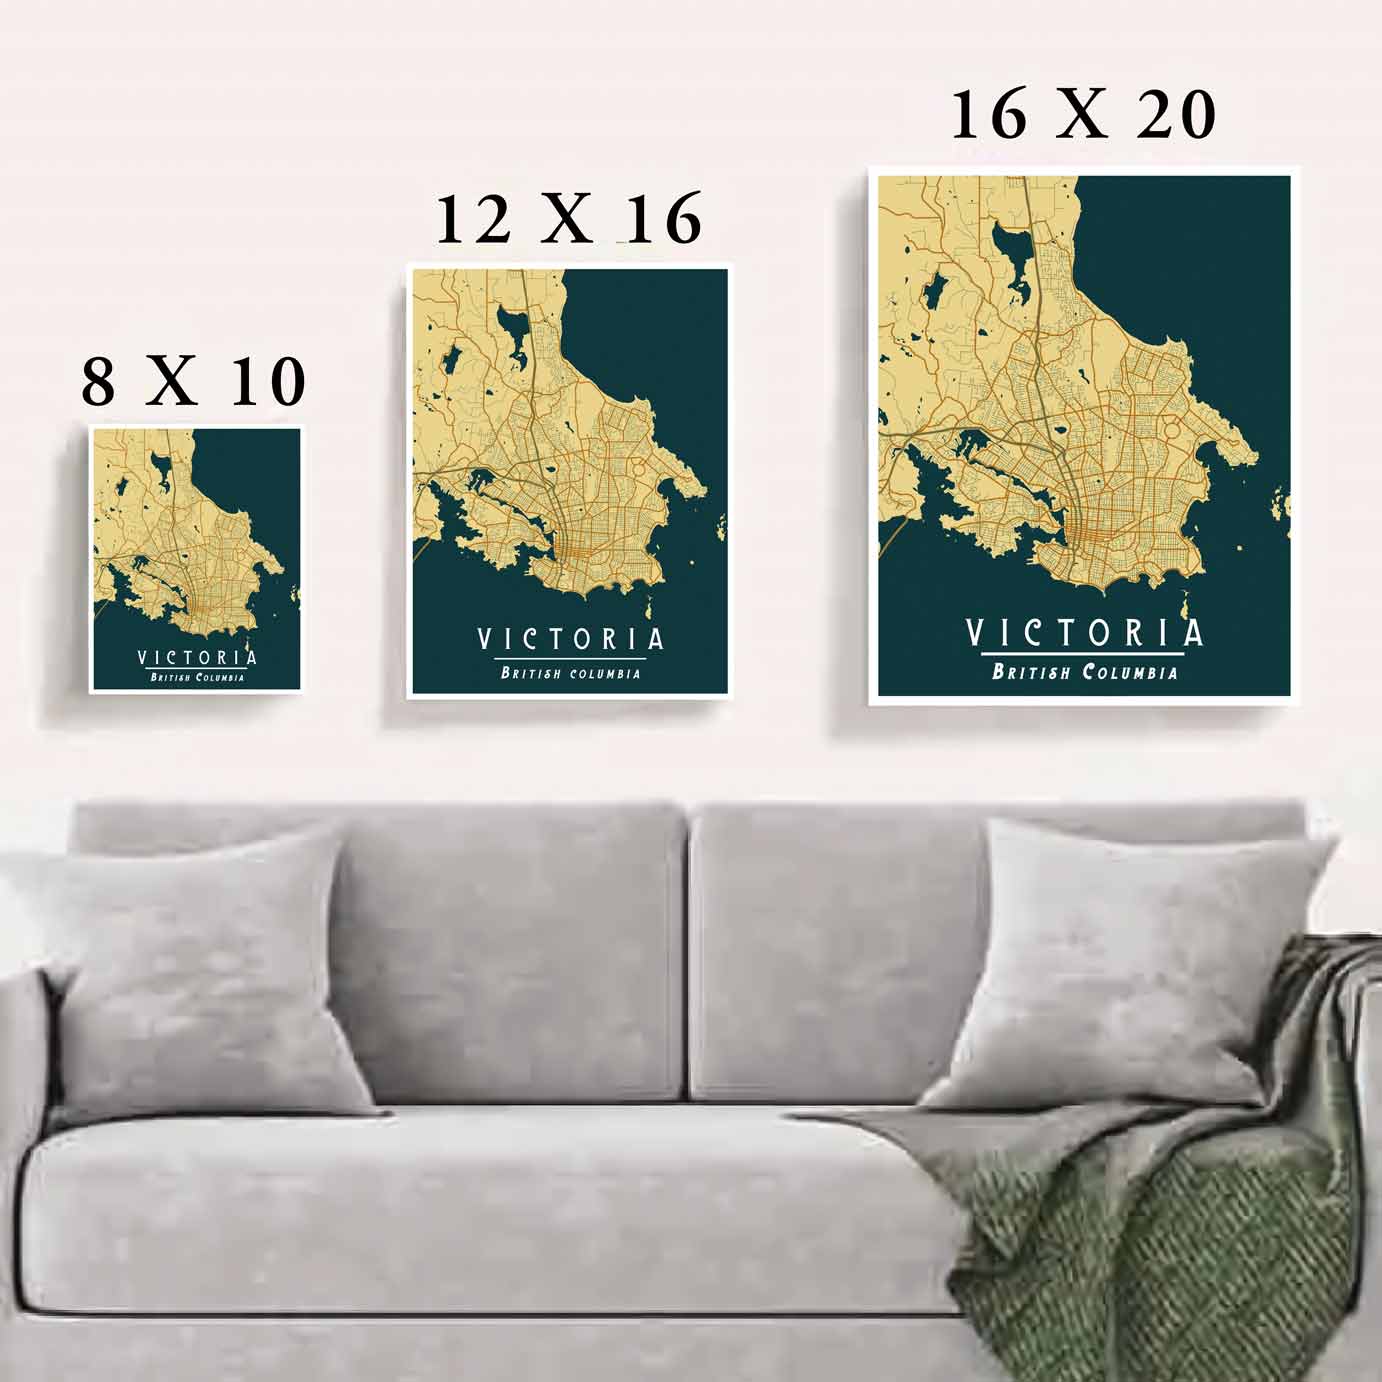 Living Room, Victoria vintage style art print is a map poster featuring the streets of Victoria in beautiful yellow tones.